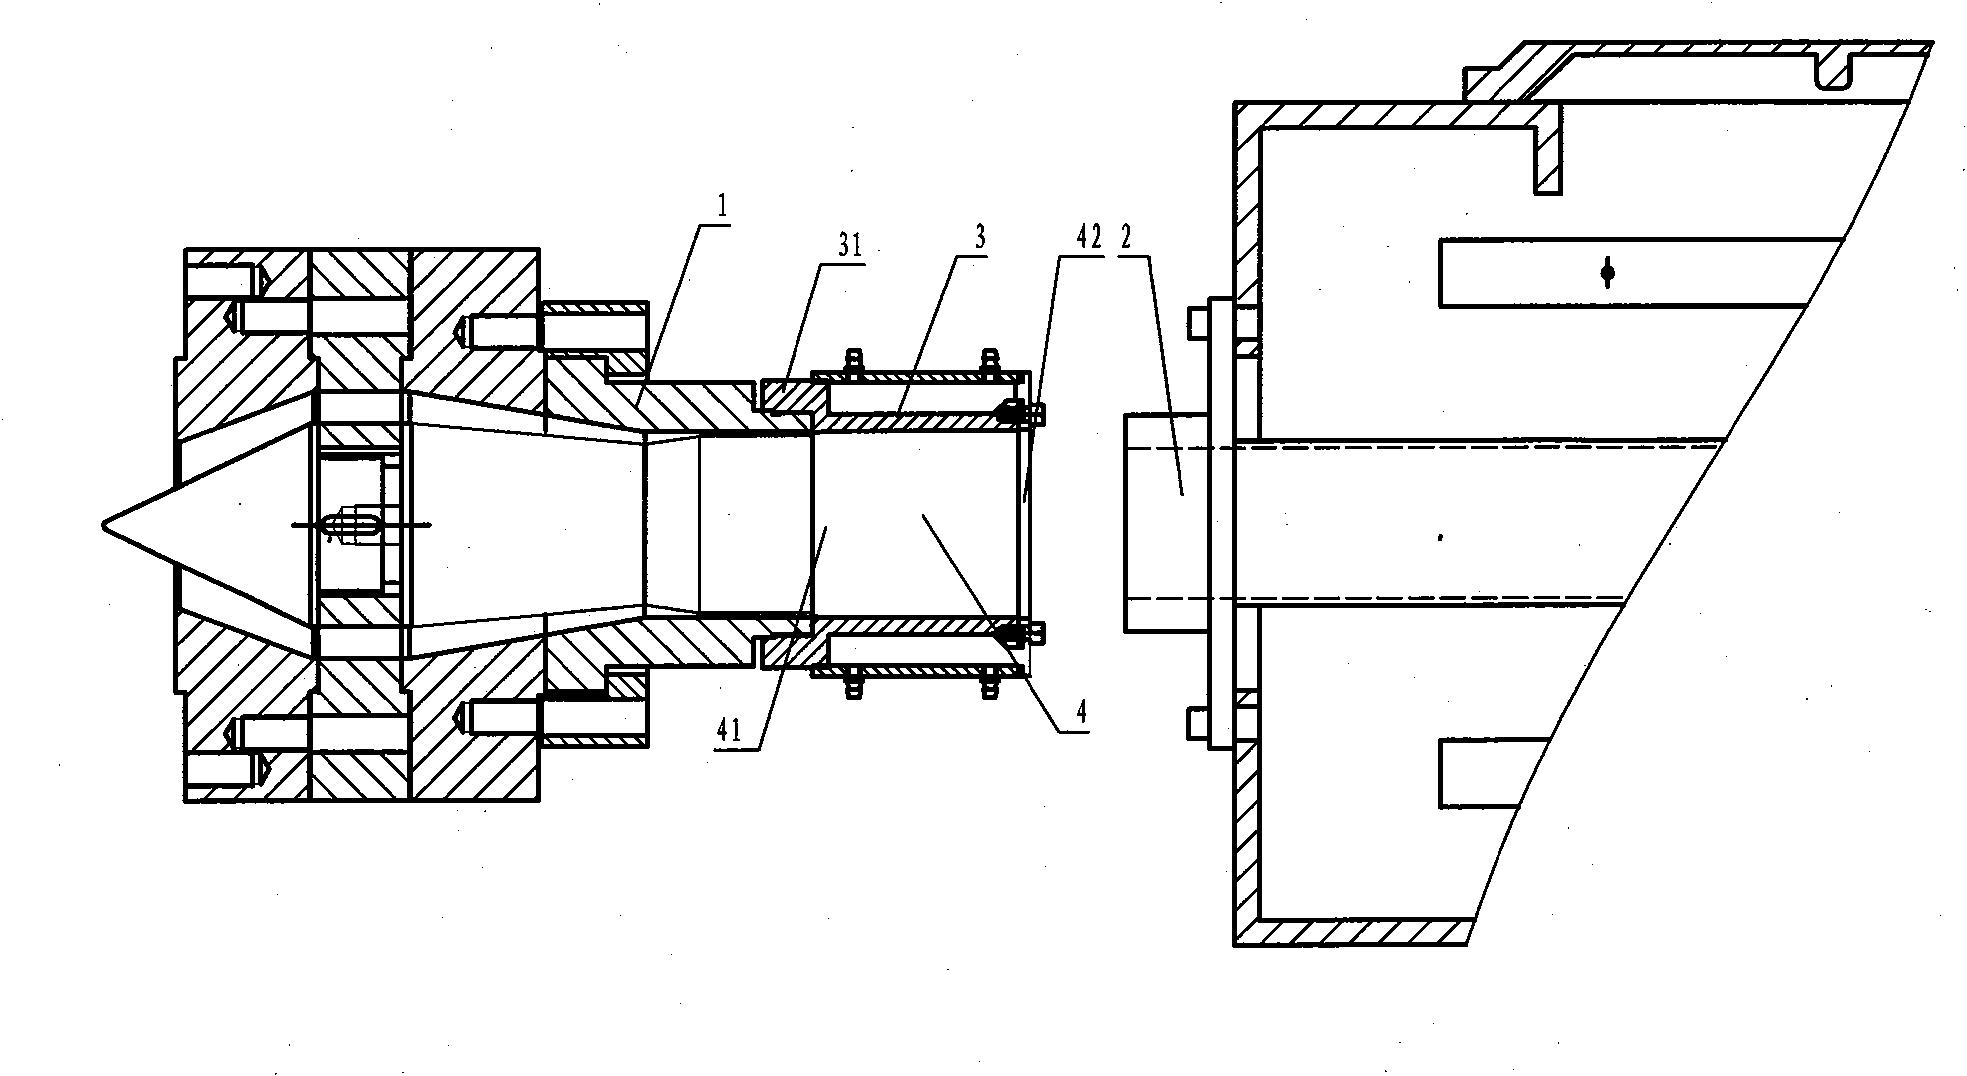 Precooling apparatus of plastic tube product line